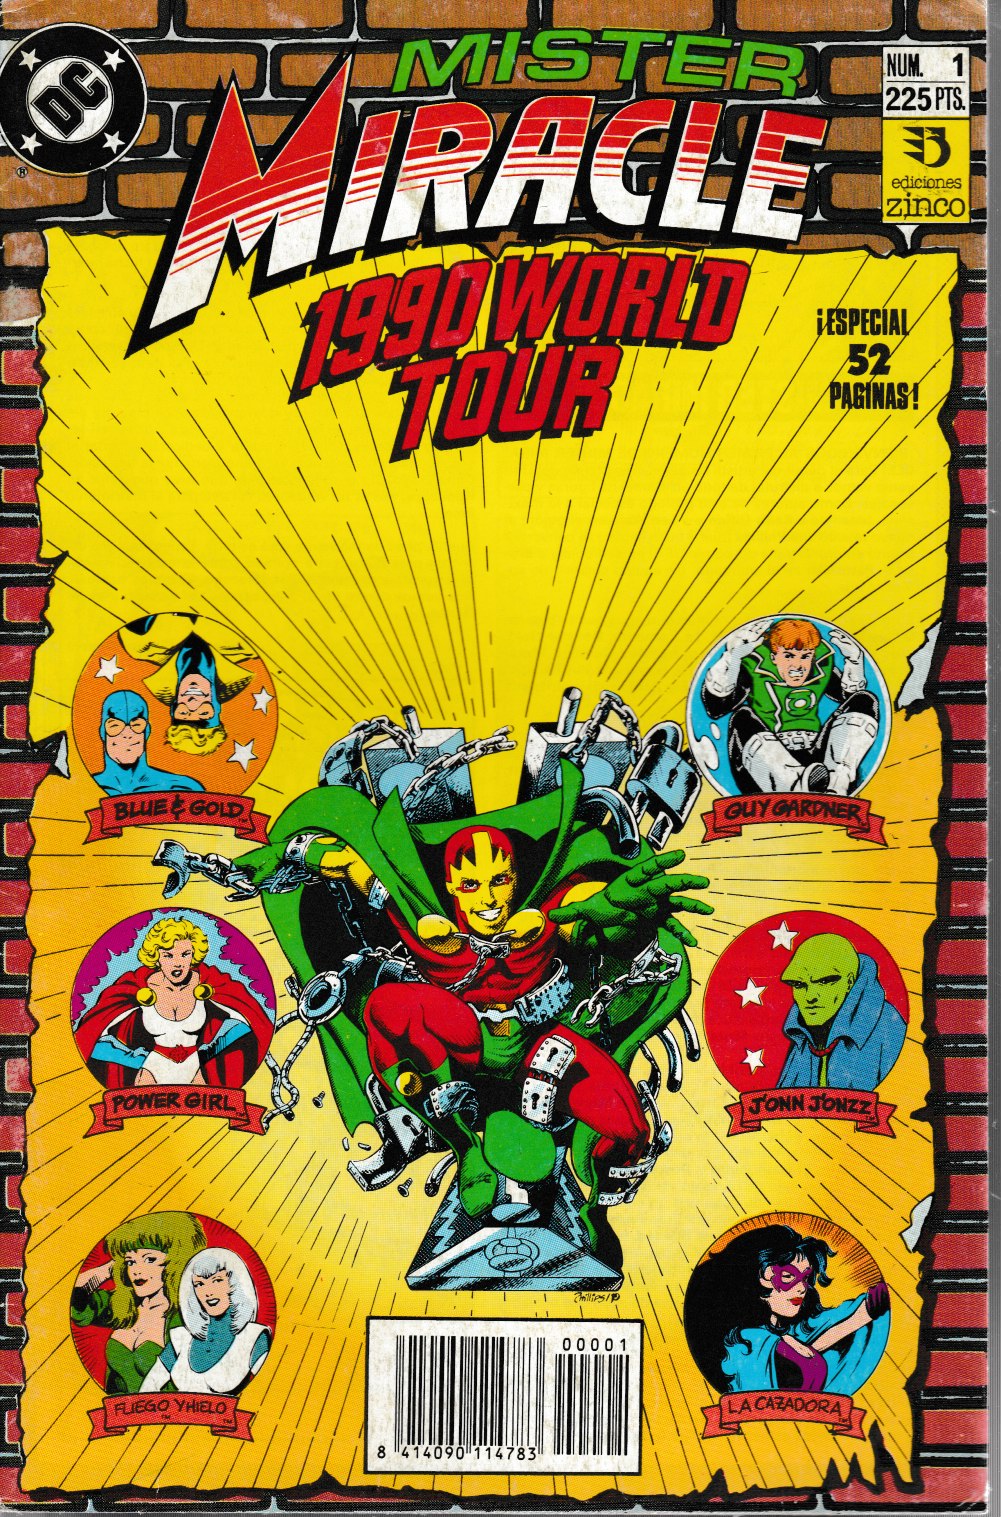 Mister Miracle. Zinco 1990. Nº 1